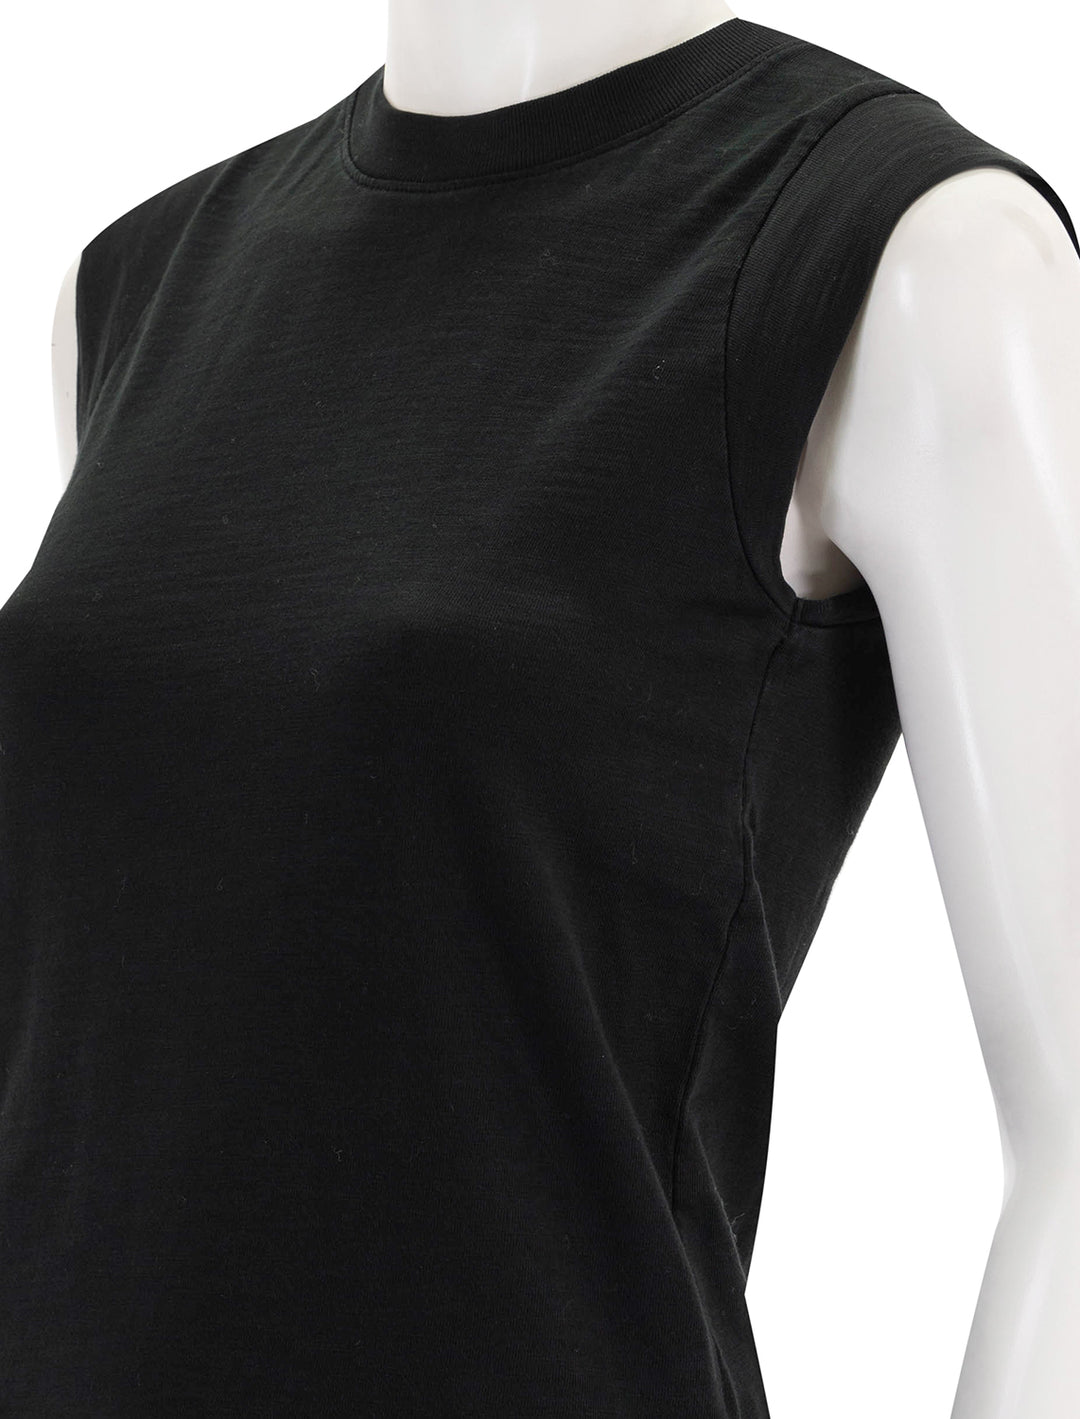 Close-up view of Nation LTD's patti muscle tank in jet black.